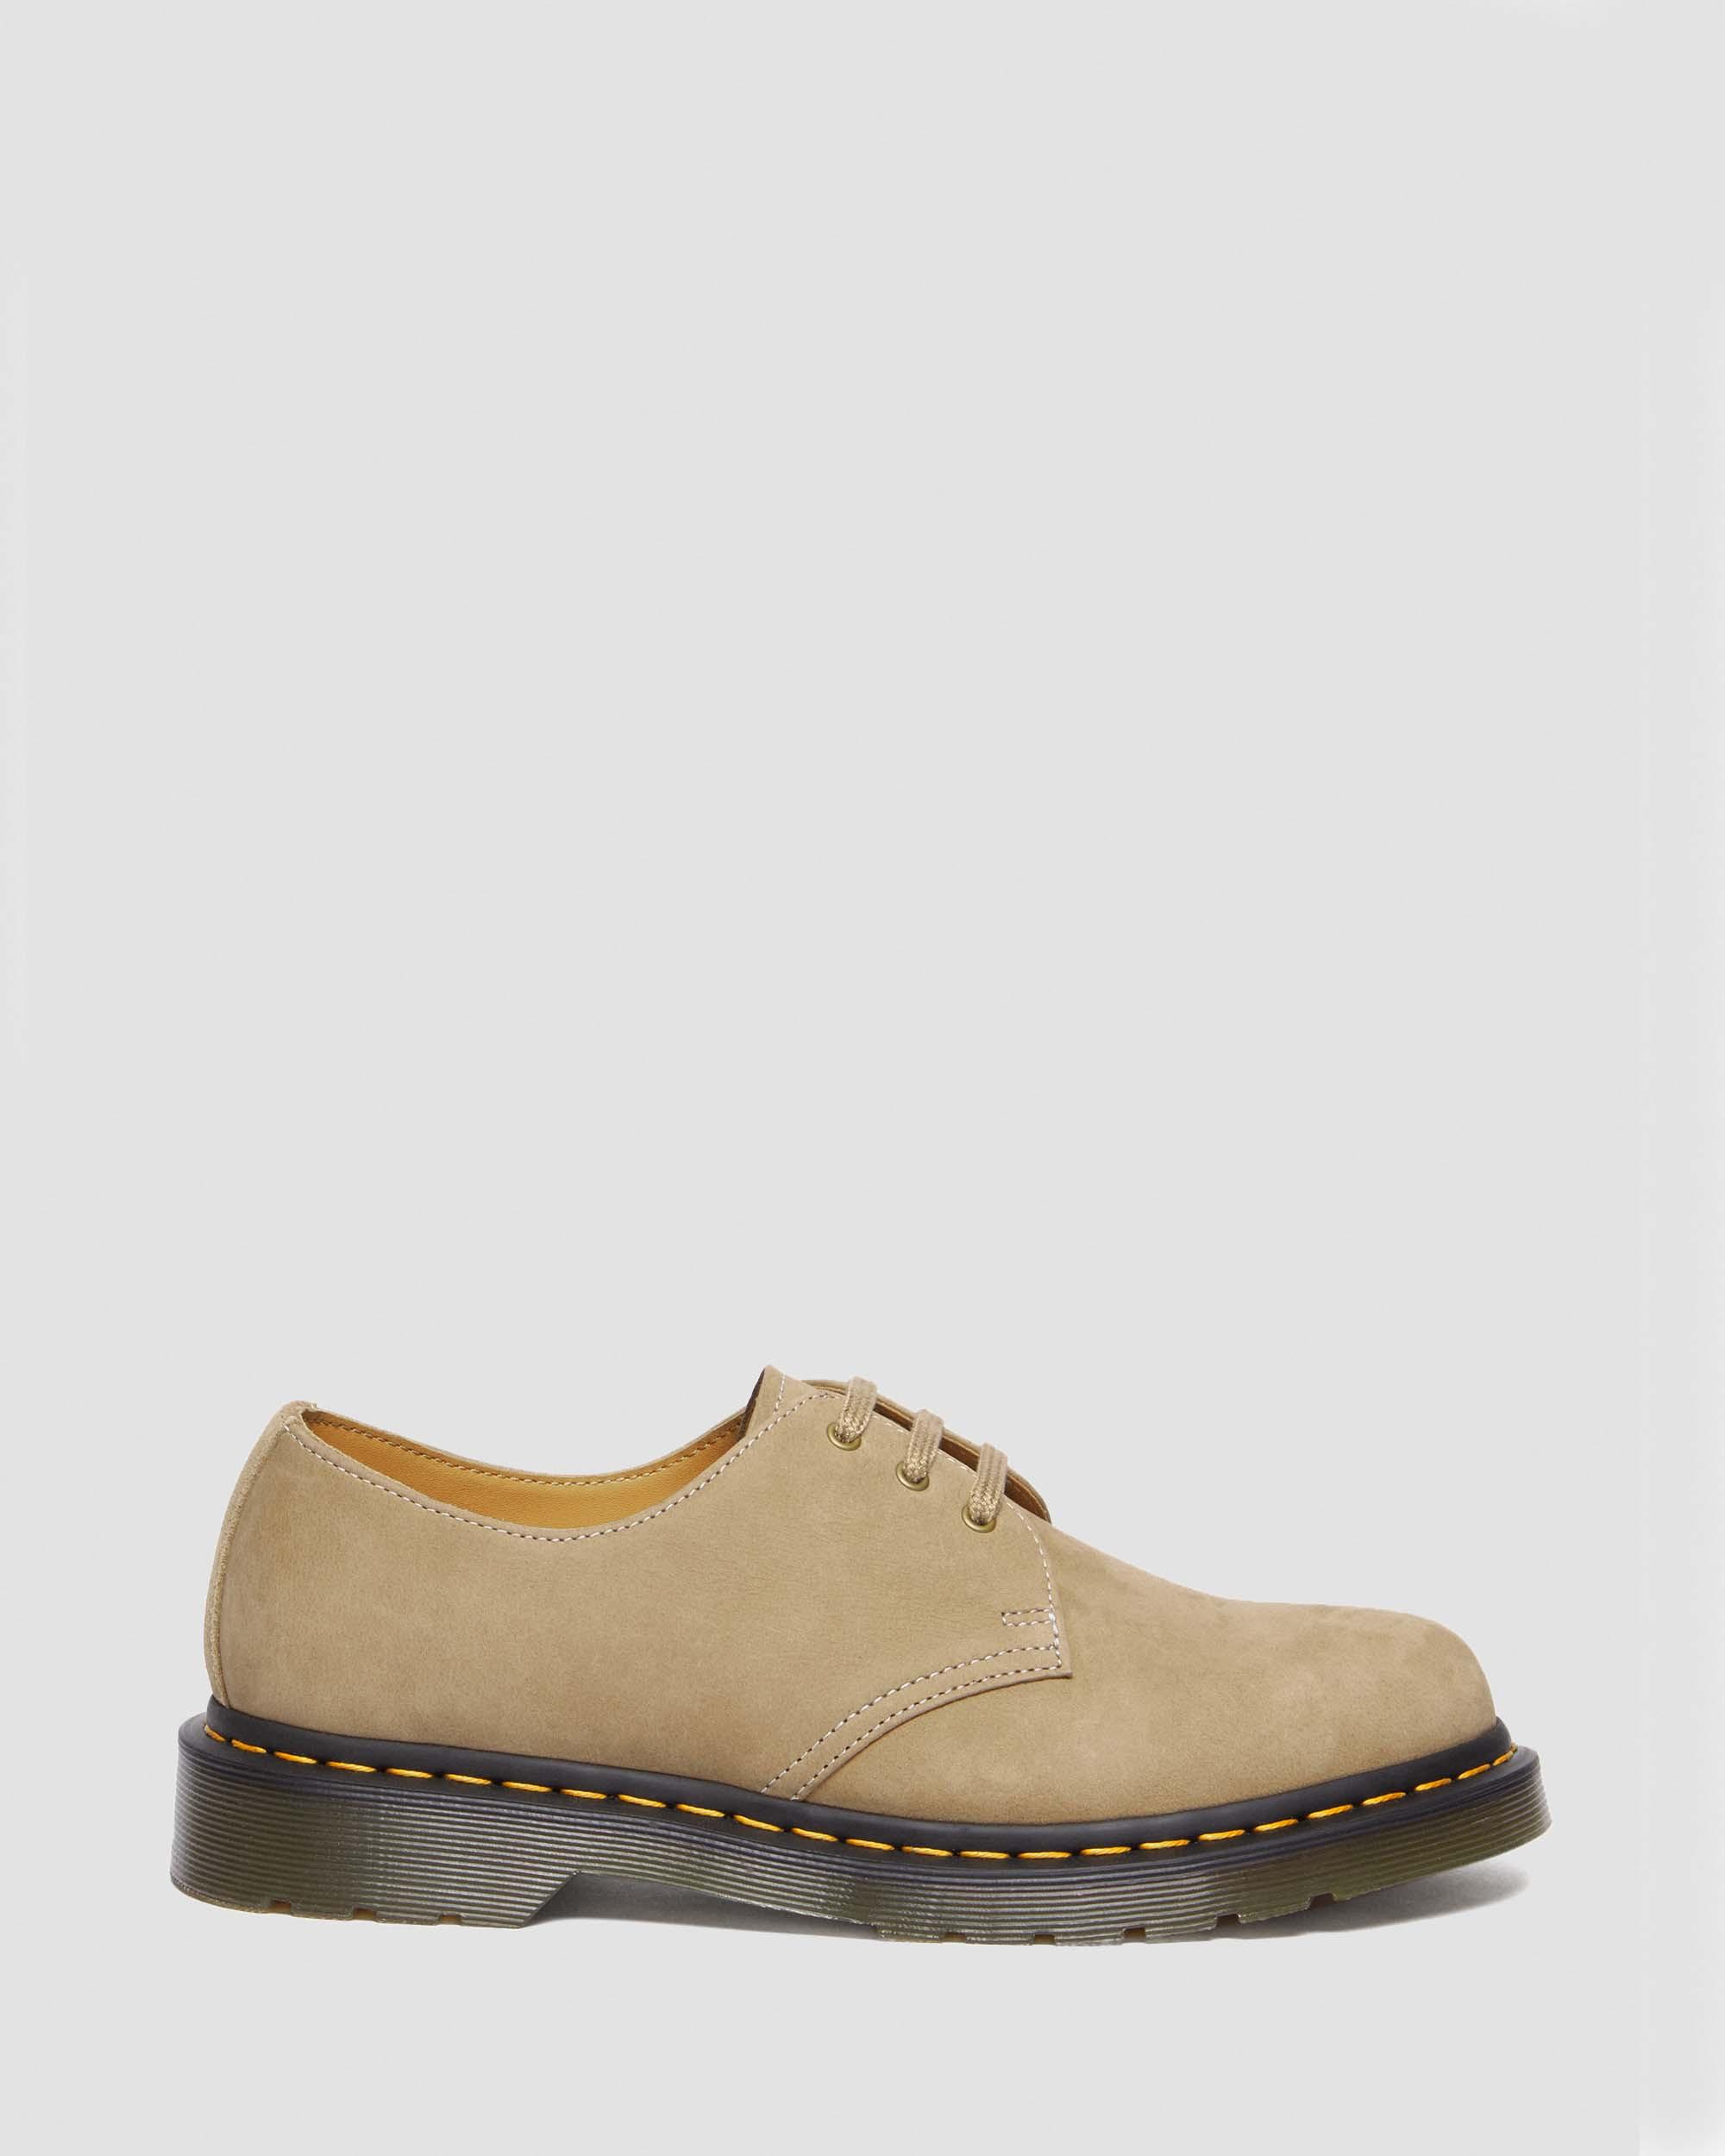 1461 Tumbled Nubuck Leather Oxford Shoes in Savannah Tan | Dr. Martens